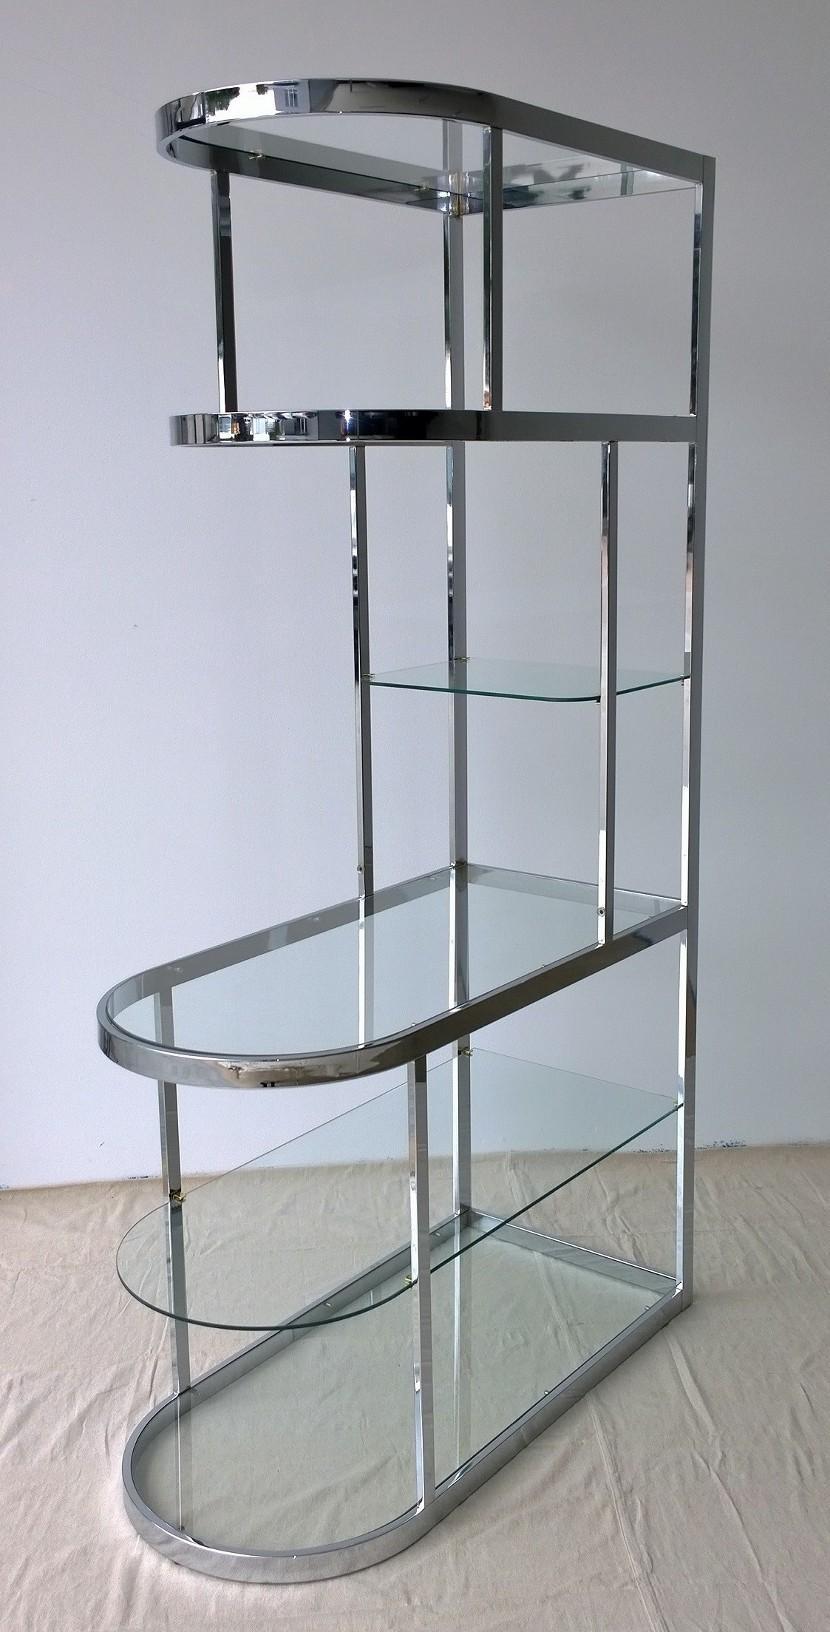 Offered is a Mid-Century Modern Design Institute America attributed chrome-plated metal and six glass shelves curved étagère with brass and rubber supports for the glass shelves. Would work great in a corner or space where the piece becomes a part